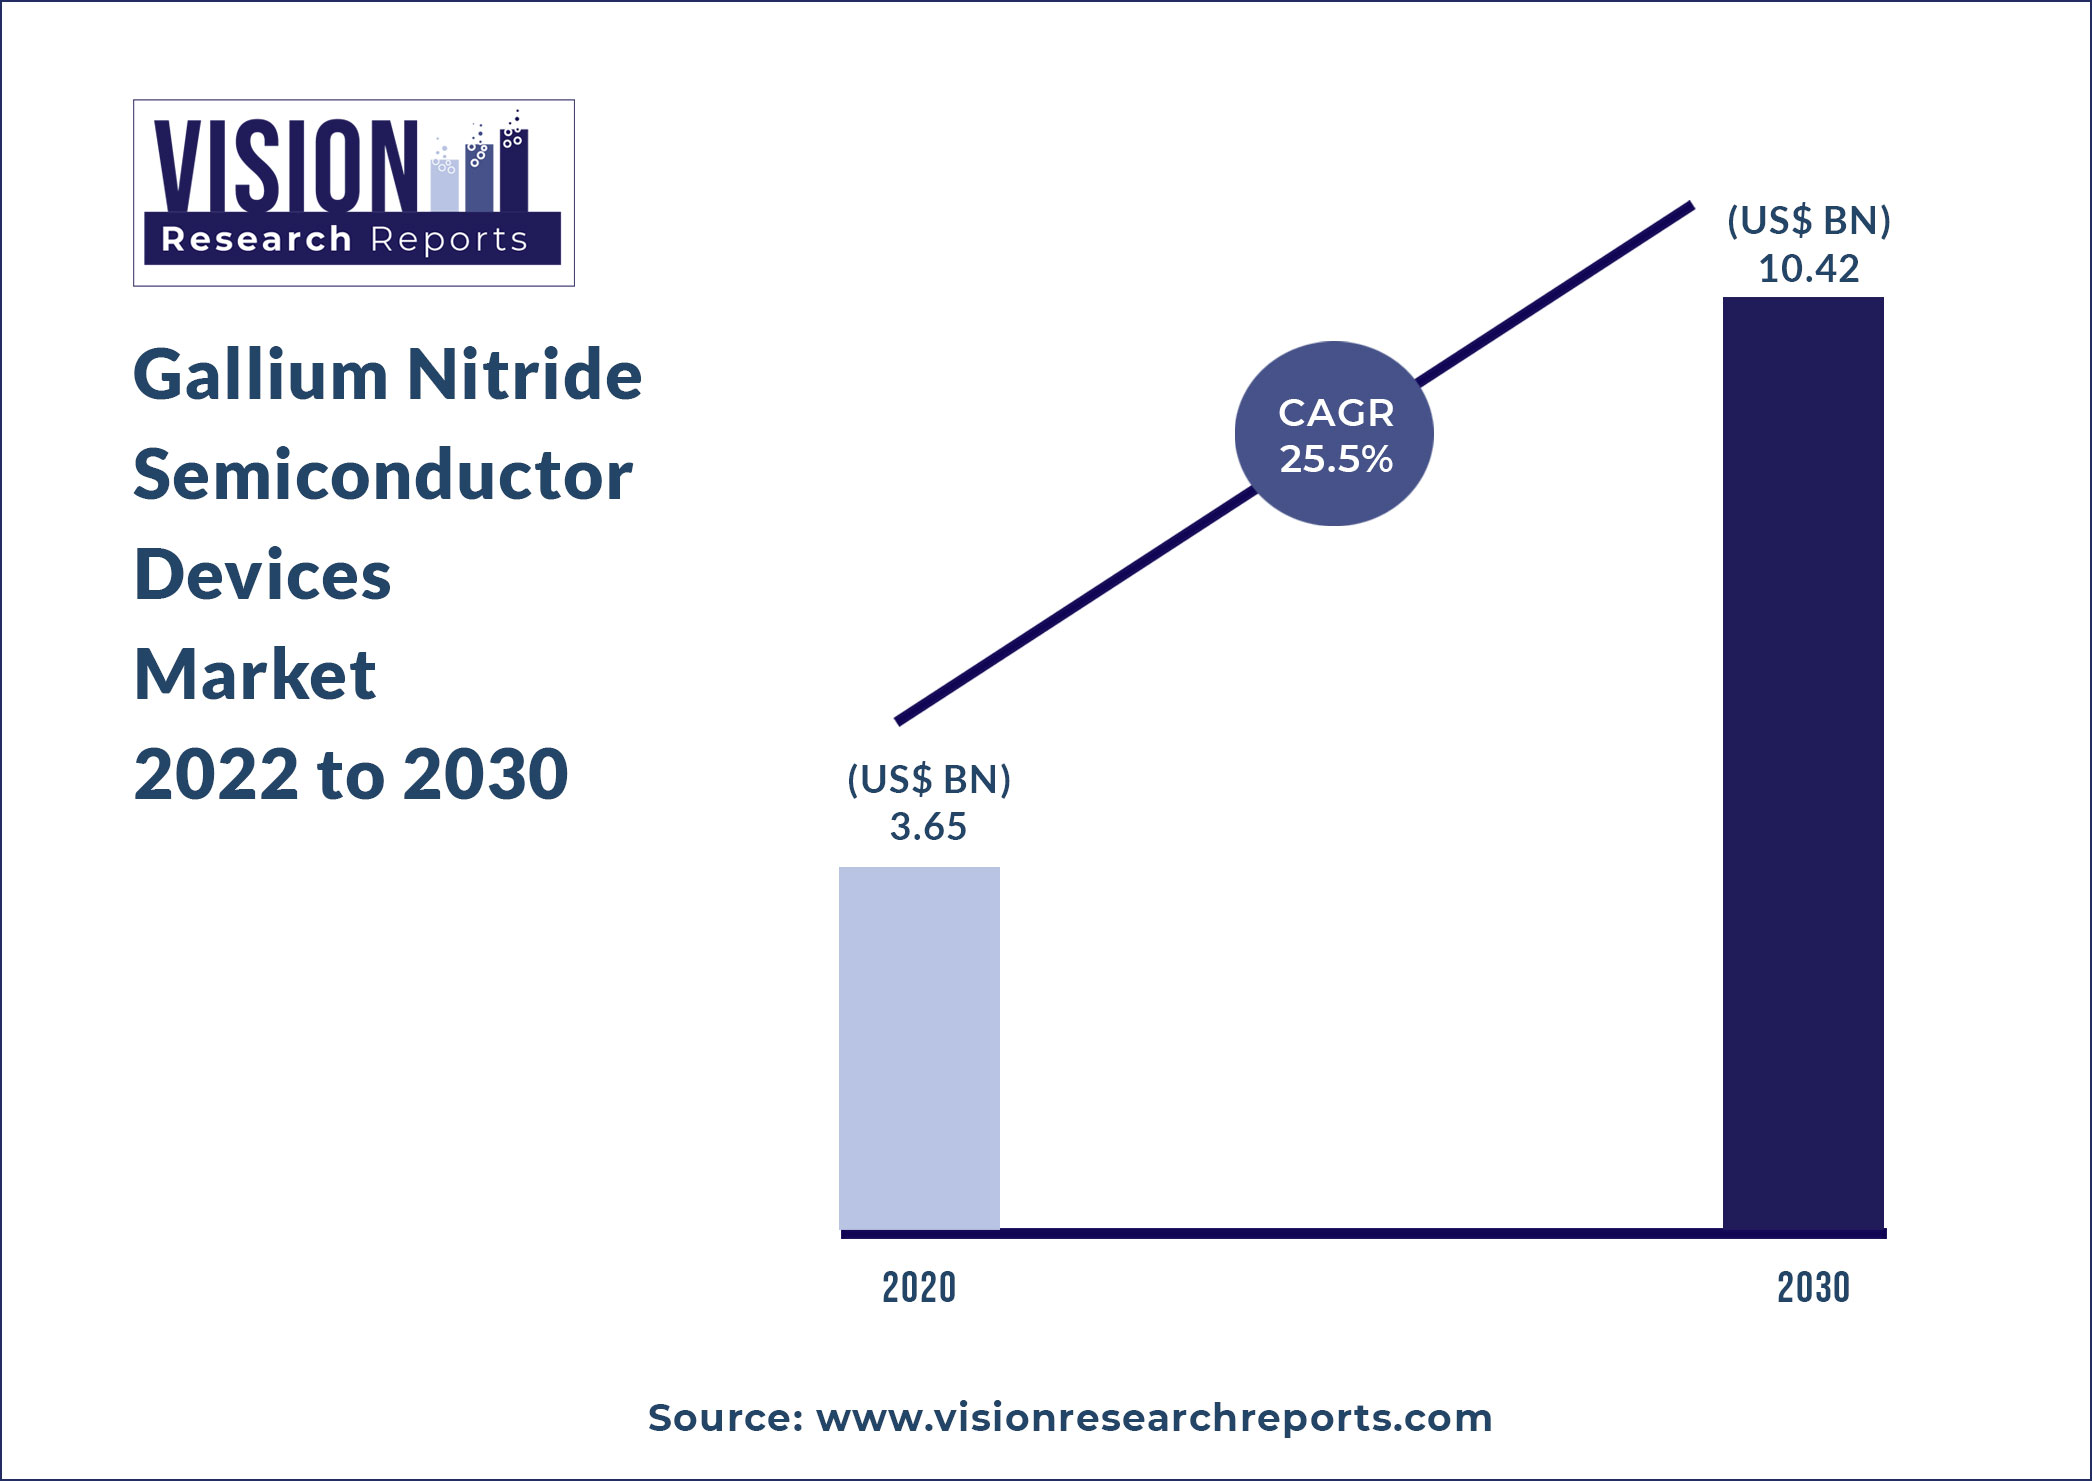 Gallium Nitride Semiconductor Devices Market Size 2022 to 2030